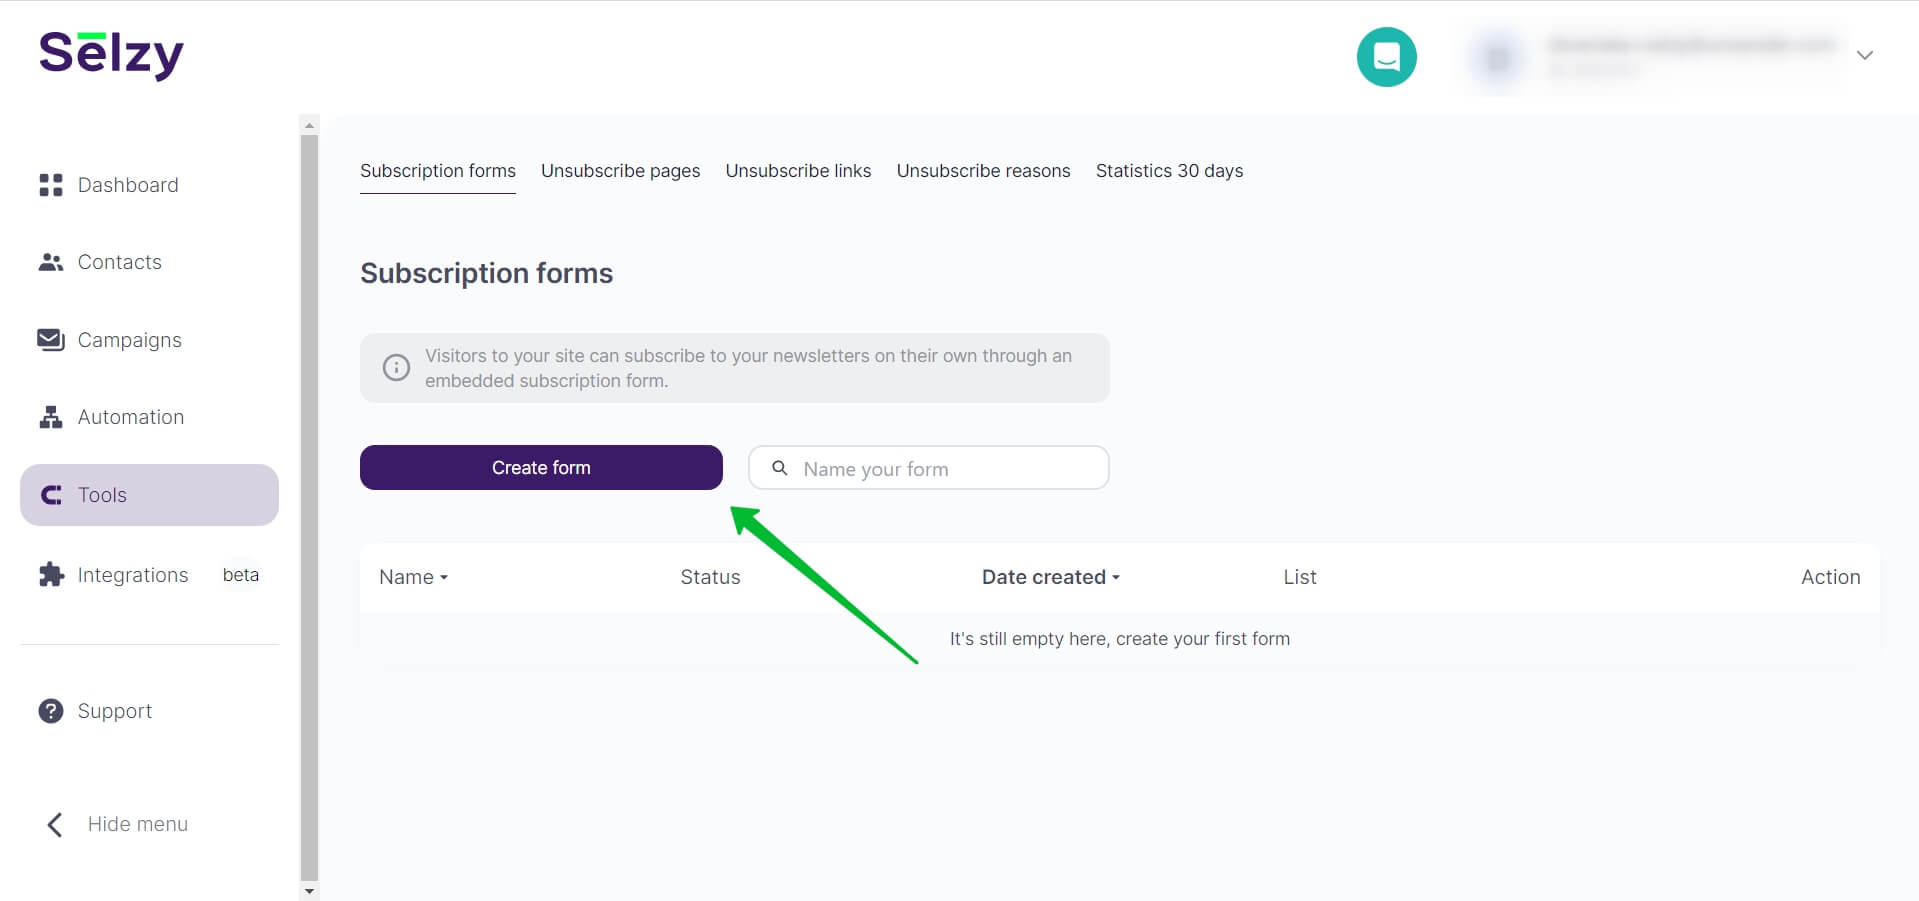 Create form button in the subscription forms subsection